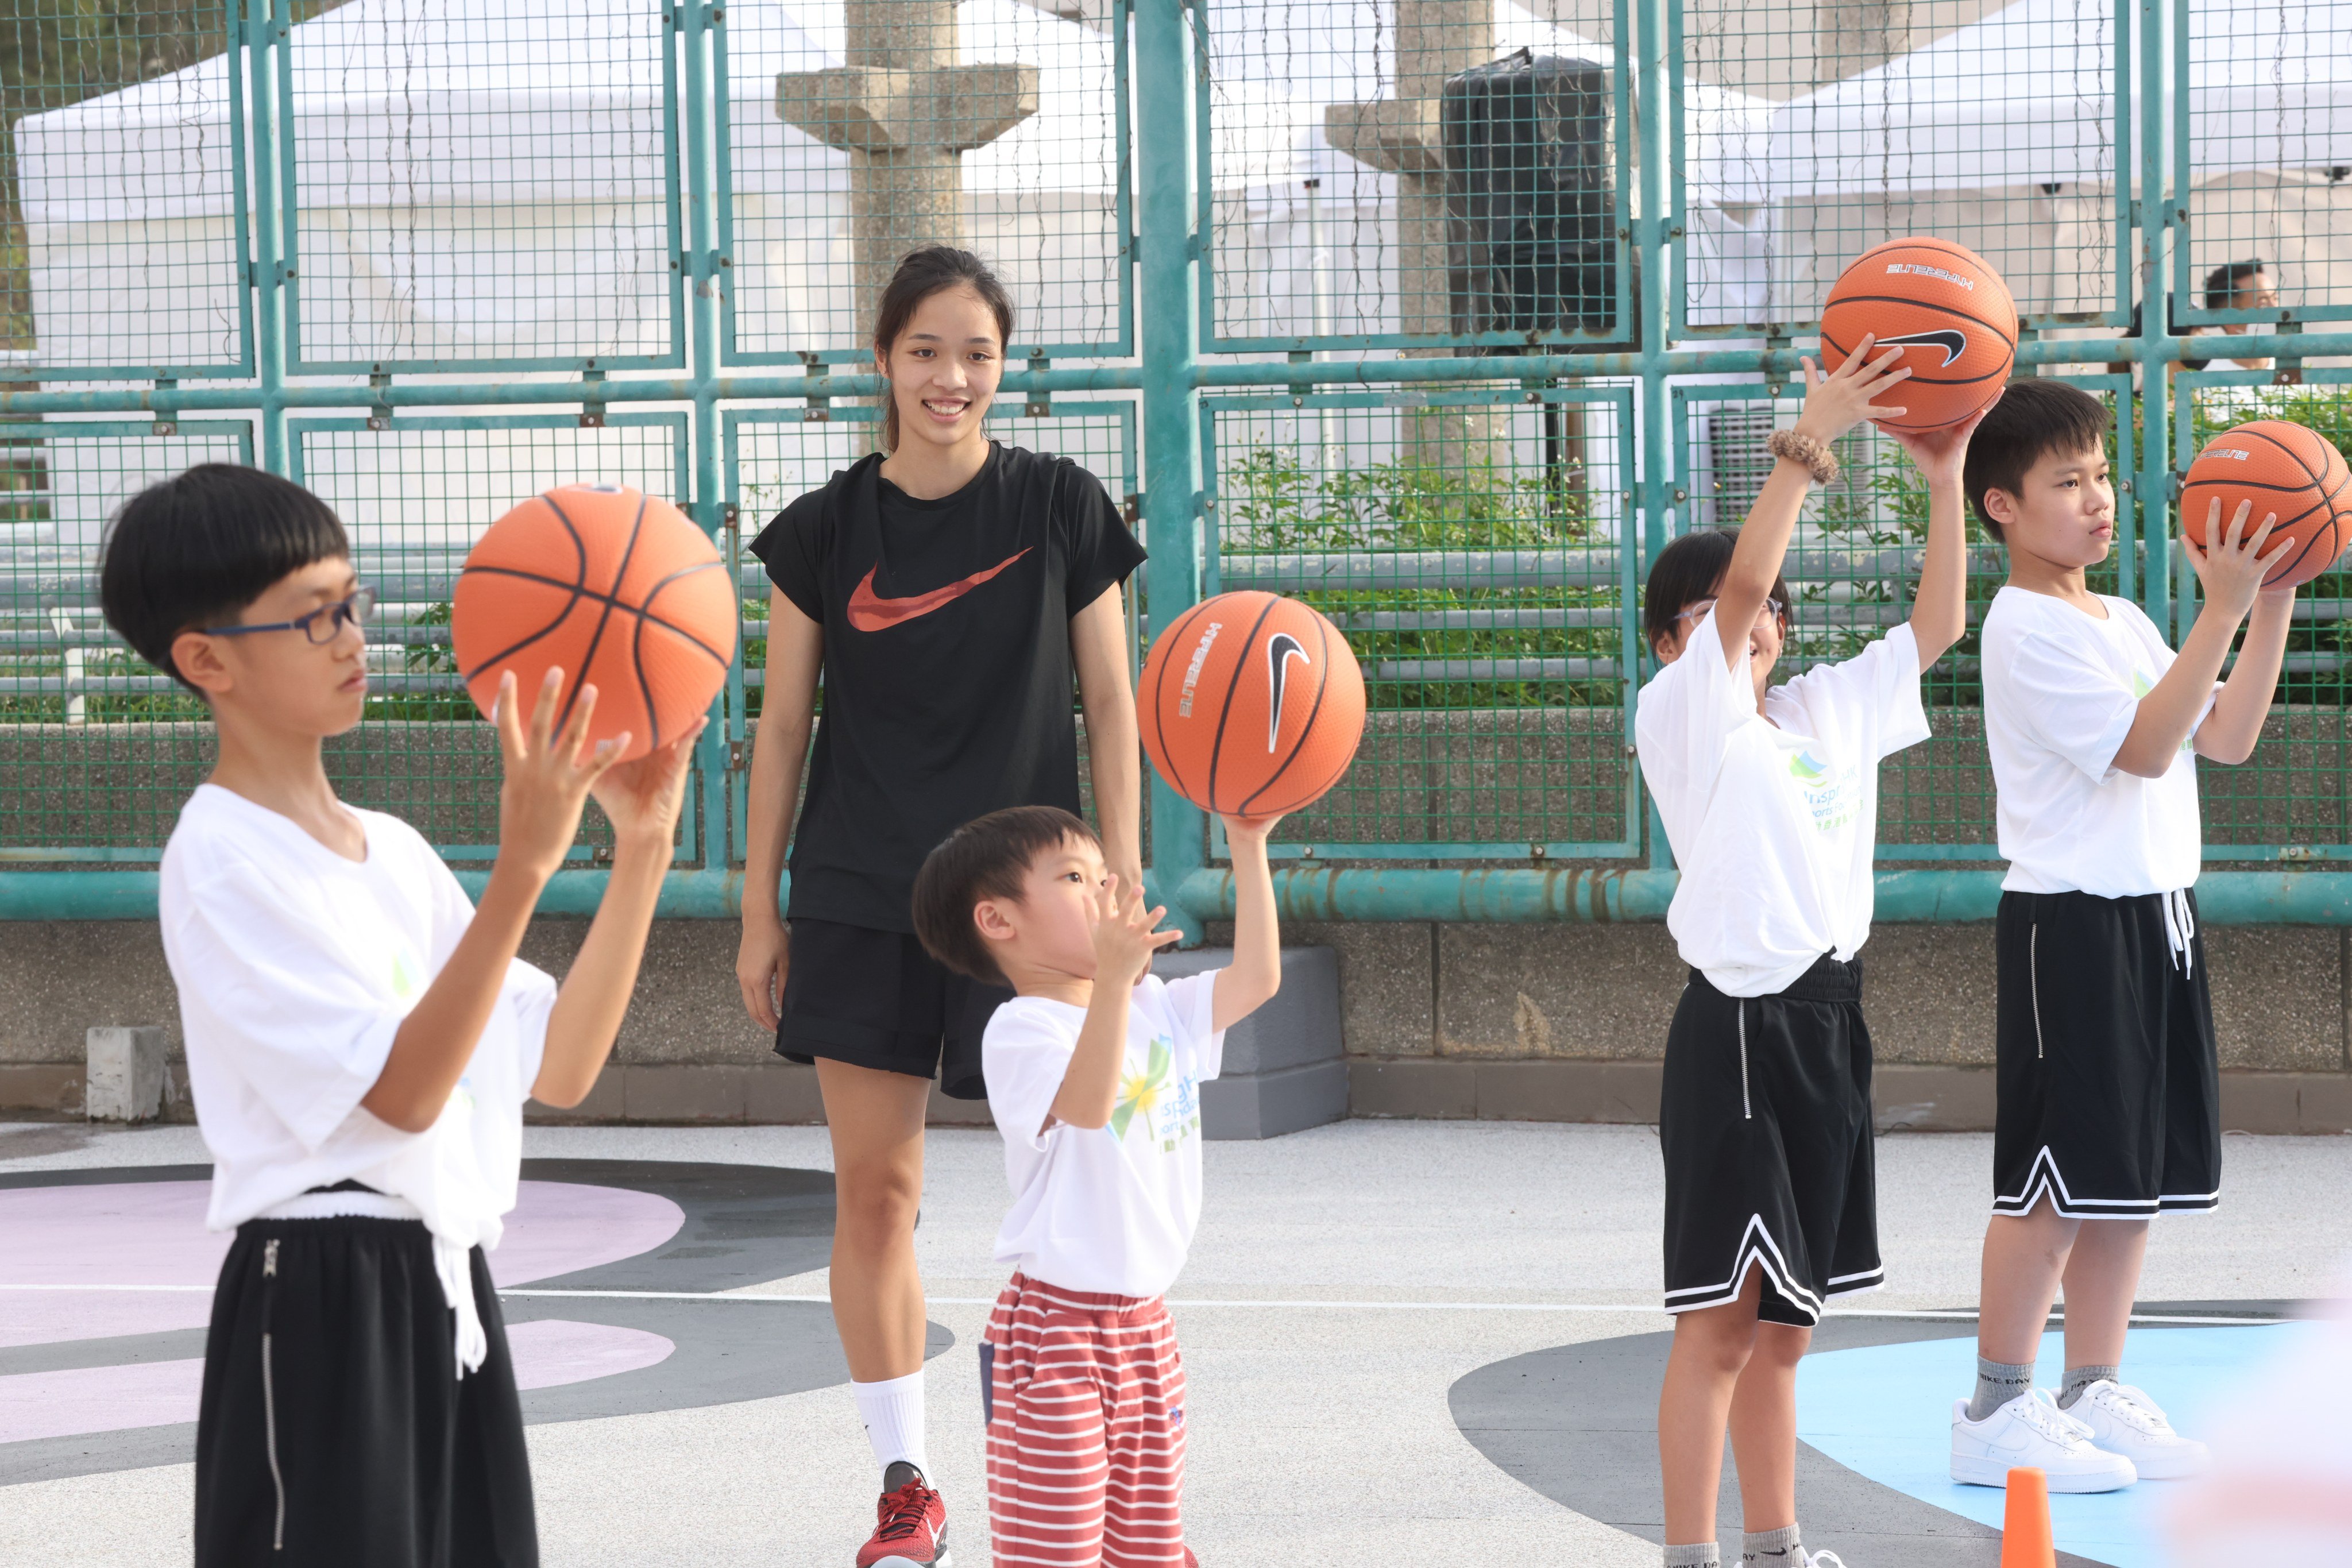 Parents of Hong Kong international students should worry less about the time their children spend on exercise and free play, and focus more on the benefits. Photo: K.Y. Cheng